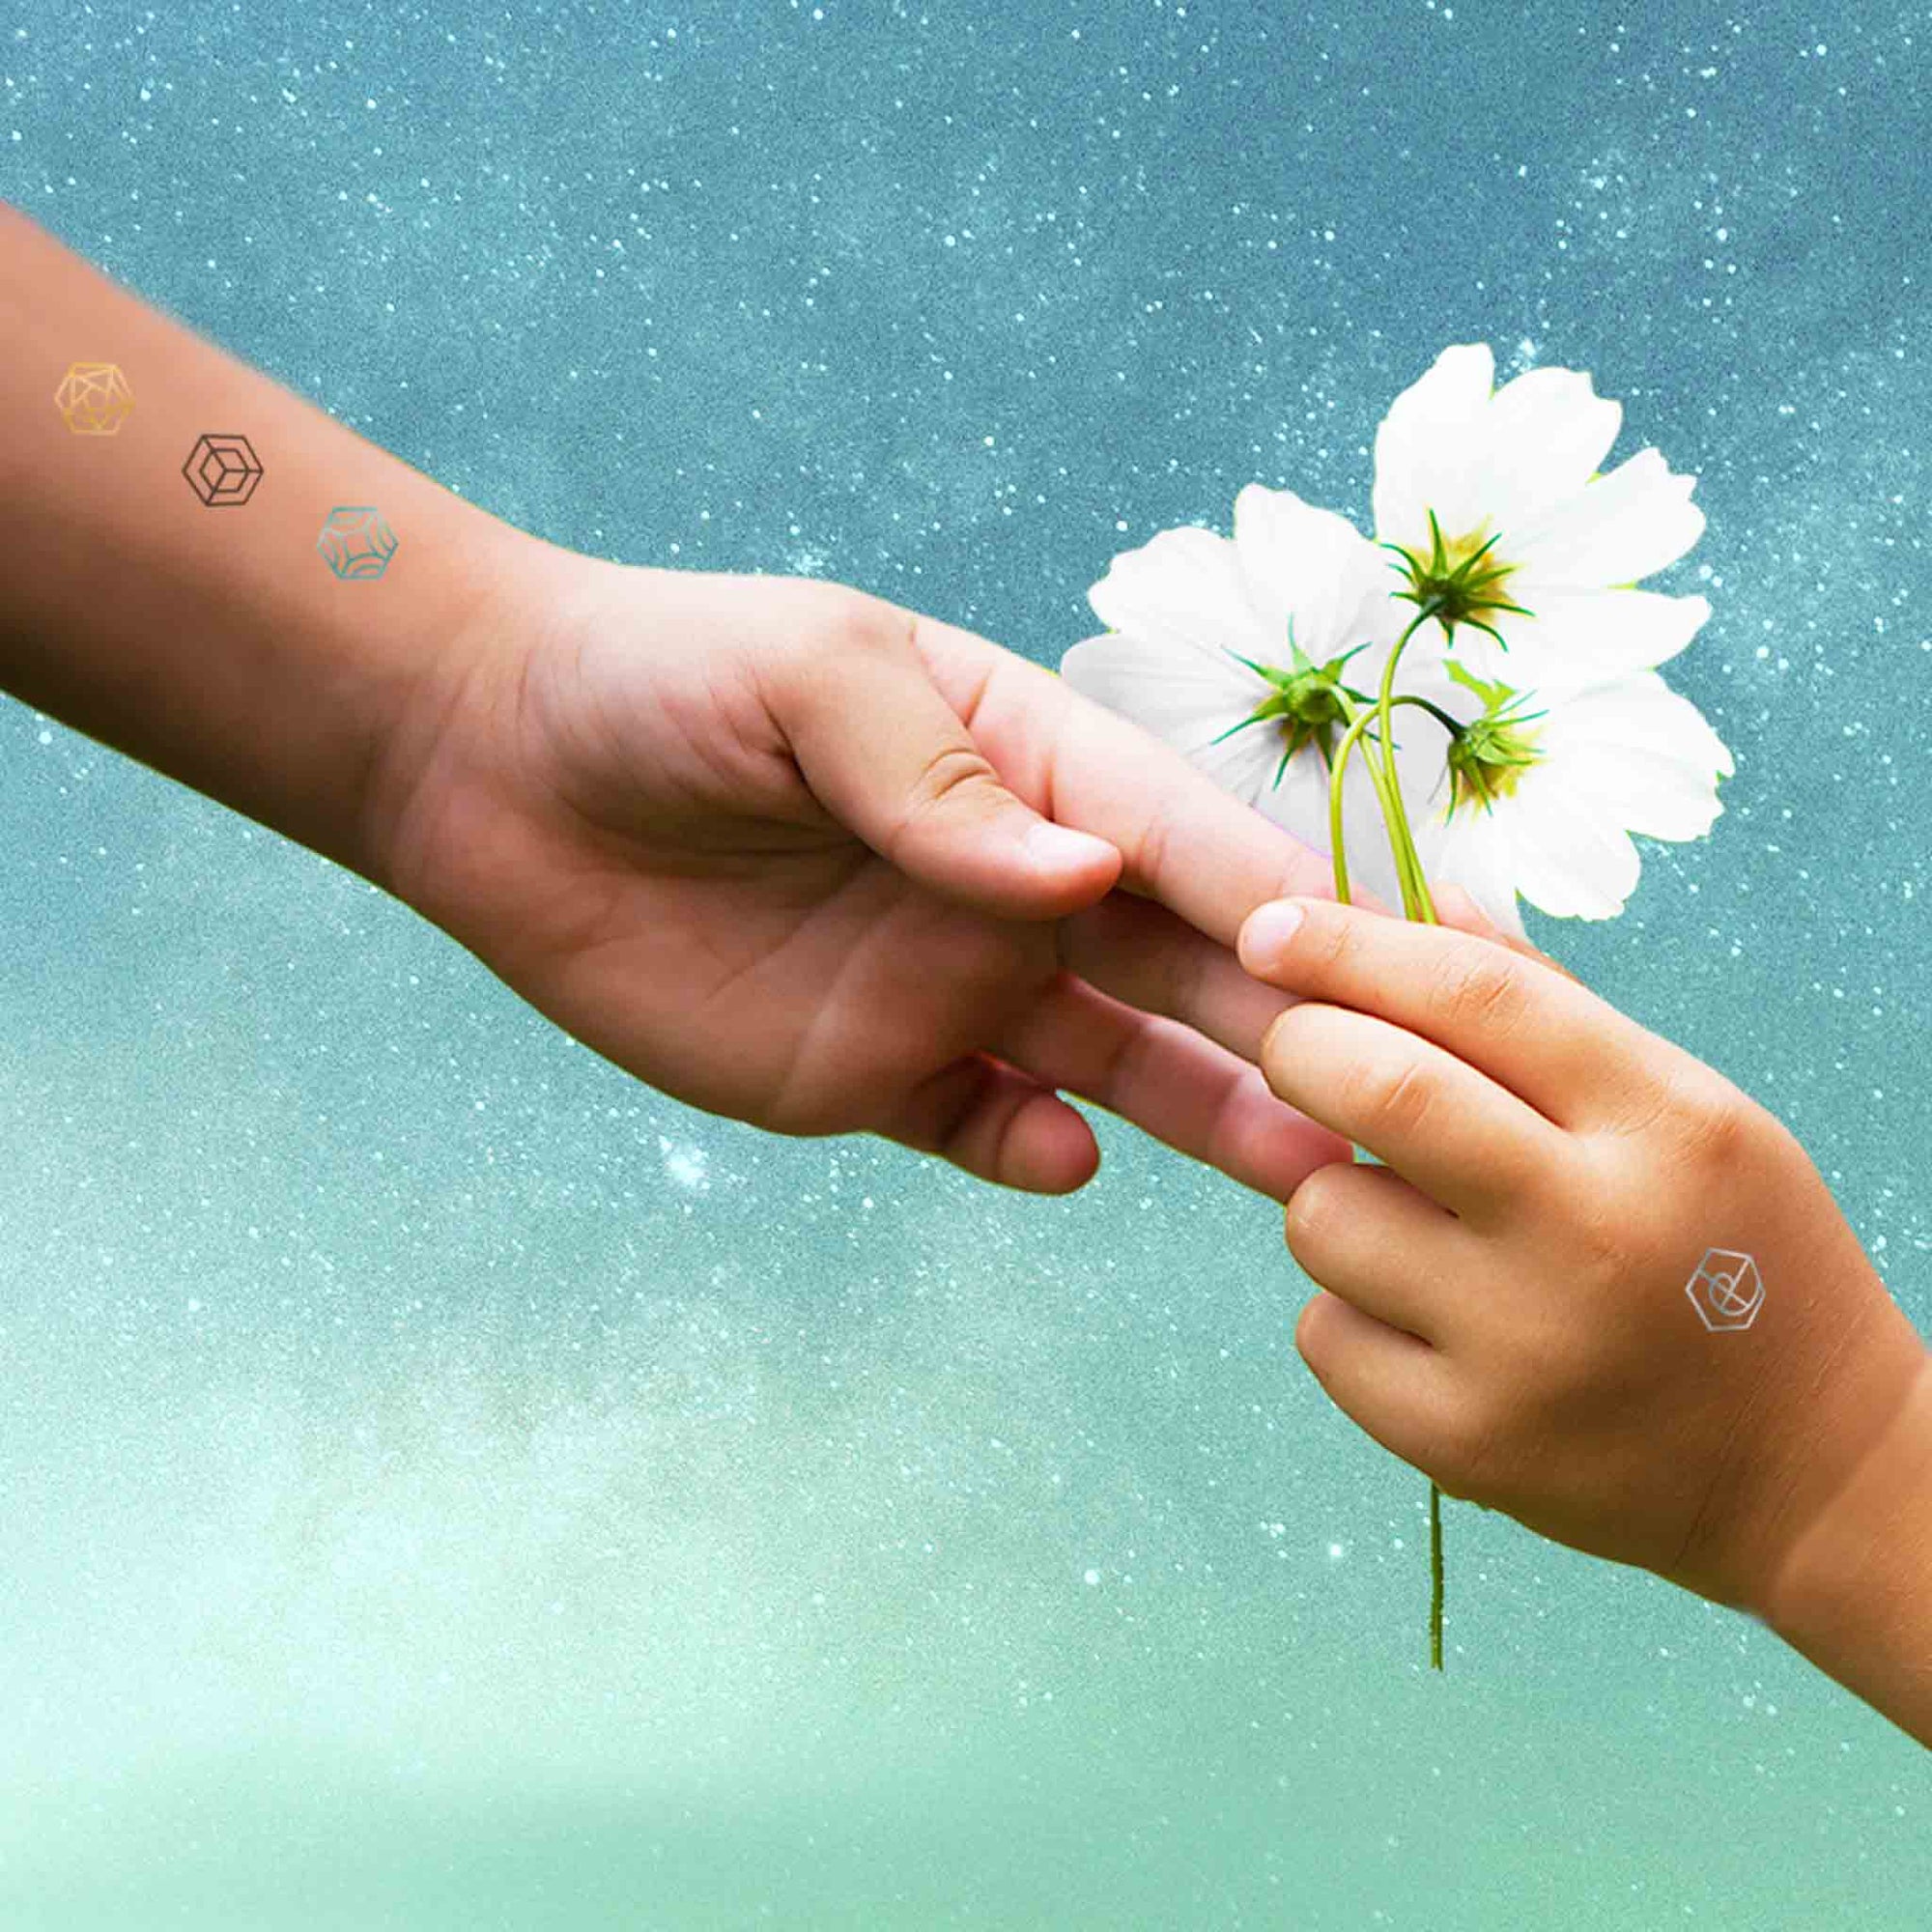 Woman reaching out to receive a flower from a child. Both are wearing mindfulness temporary tattoos. 